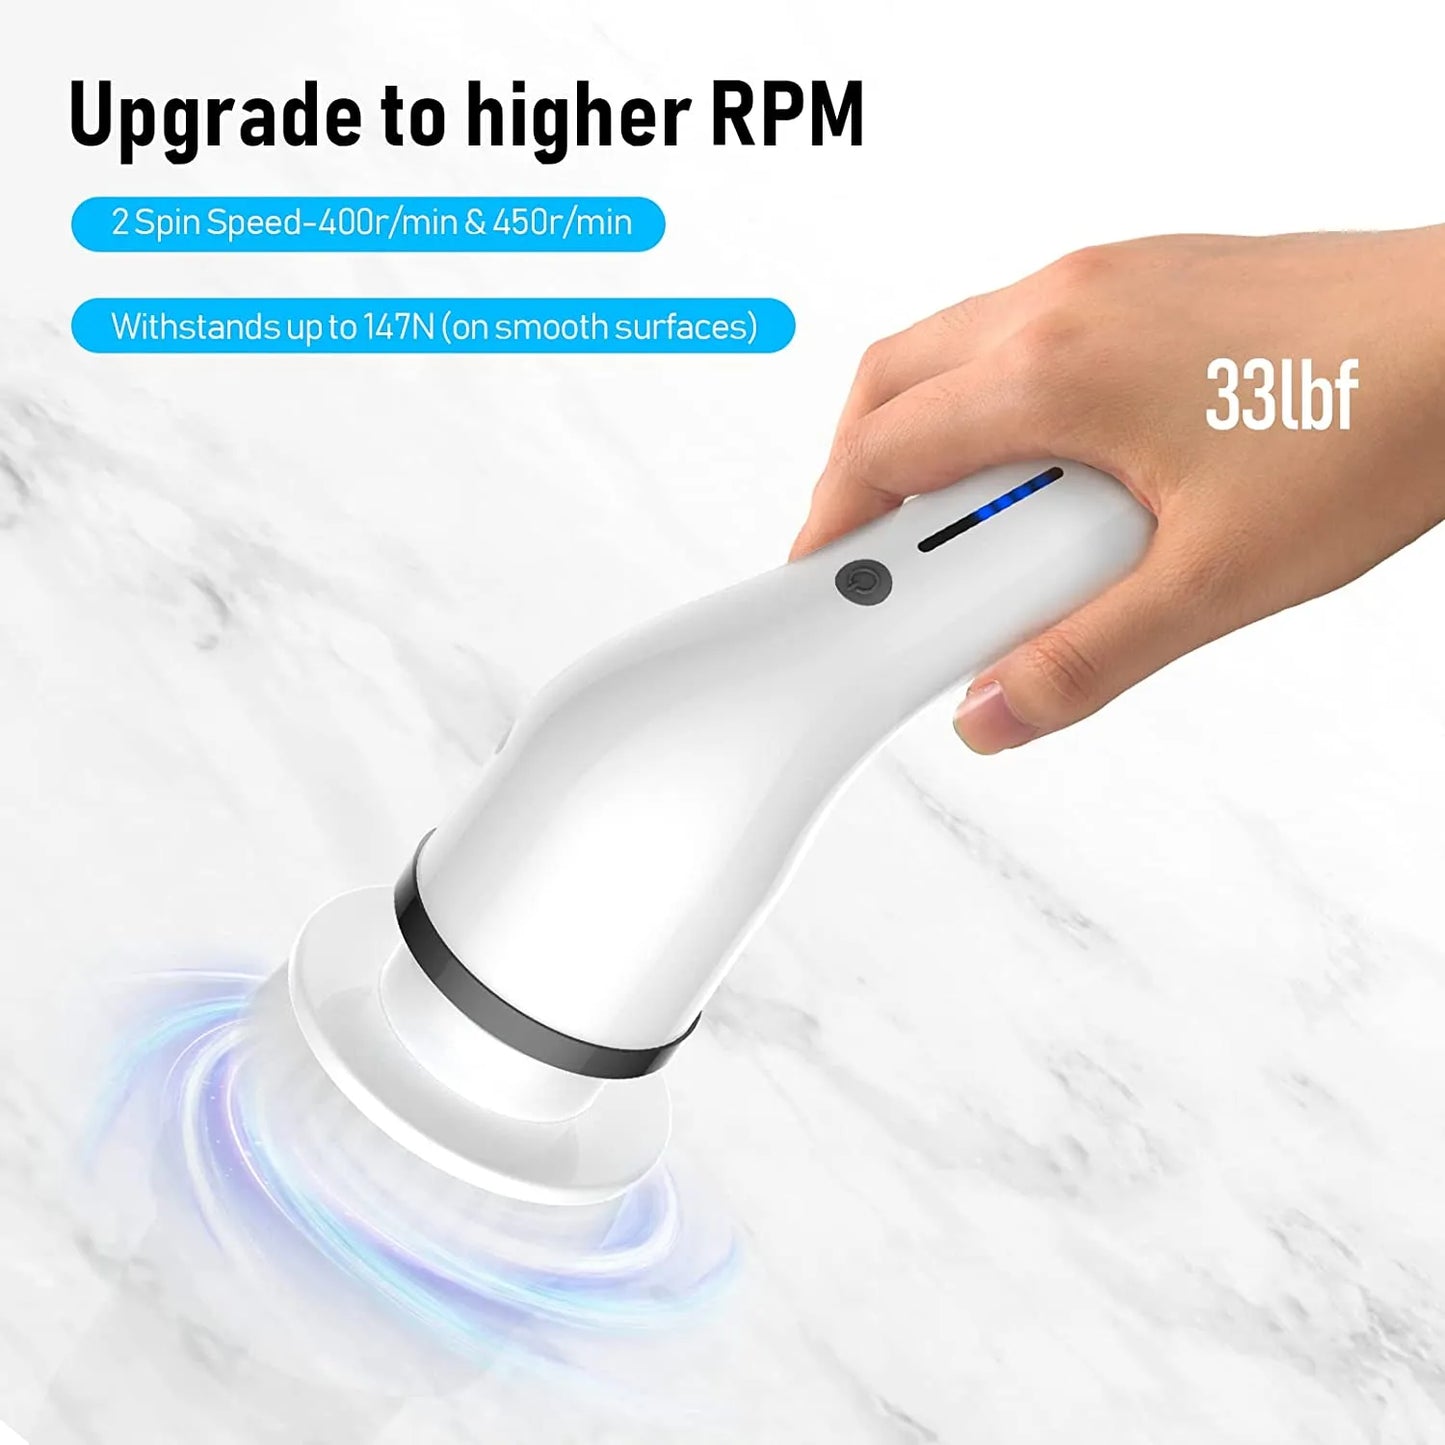 8-in-1 Multifunctional Electric Cleaning Brush USB Charging Household wash